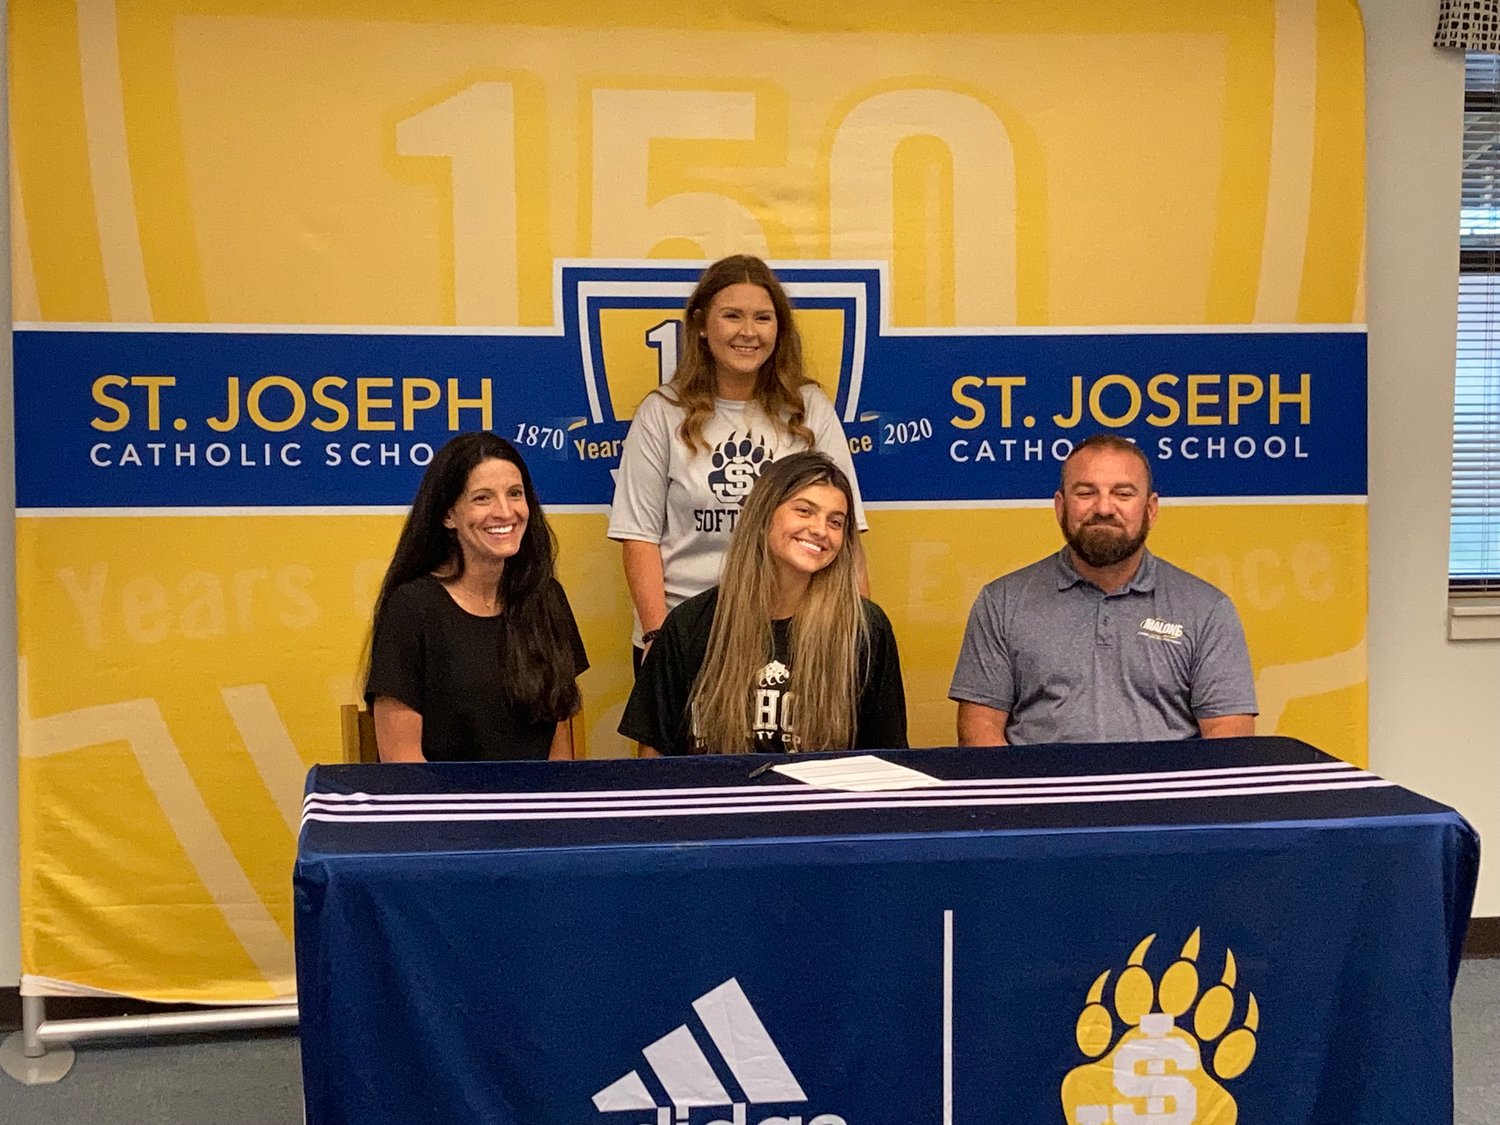 Pictured here are Edwards, center; Kelli Phillips, her mother, left; Dan Edwards, her father, right; and Danielle Poe, Bruin softball coach, standing behind Edwards.